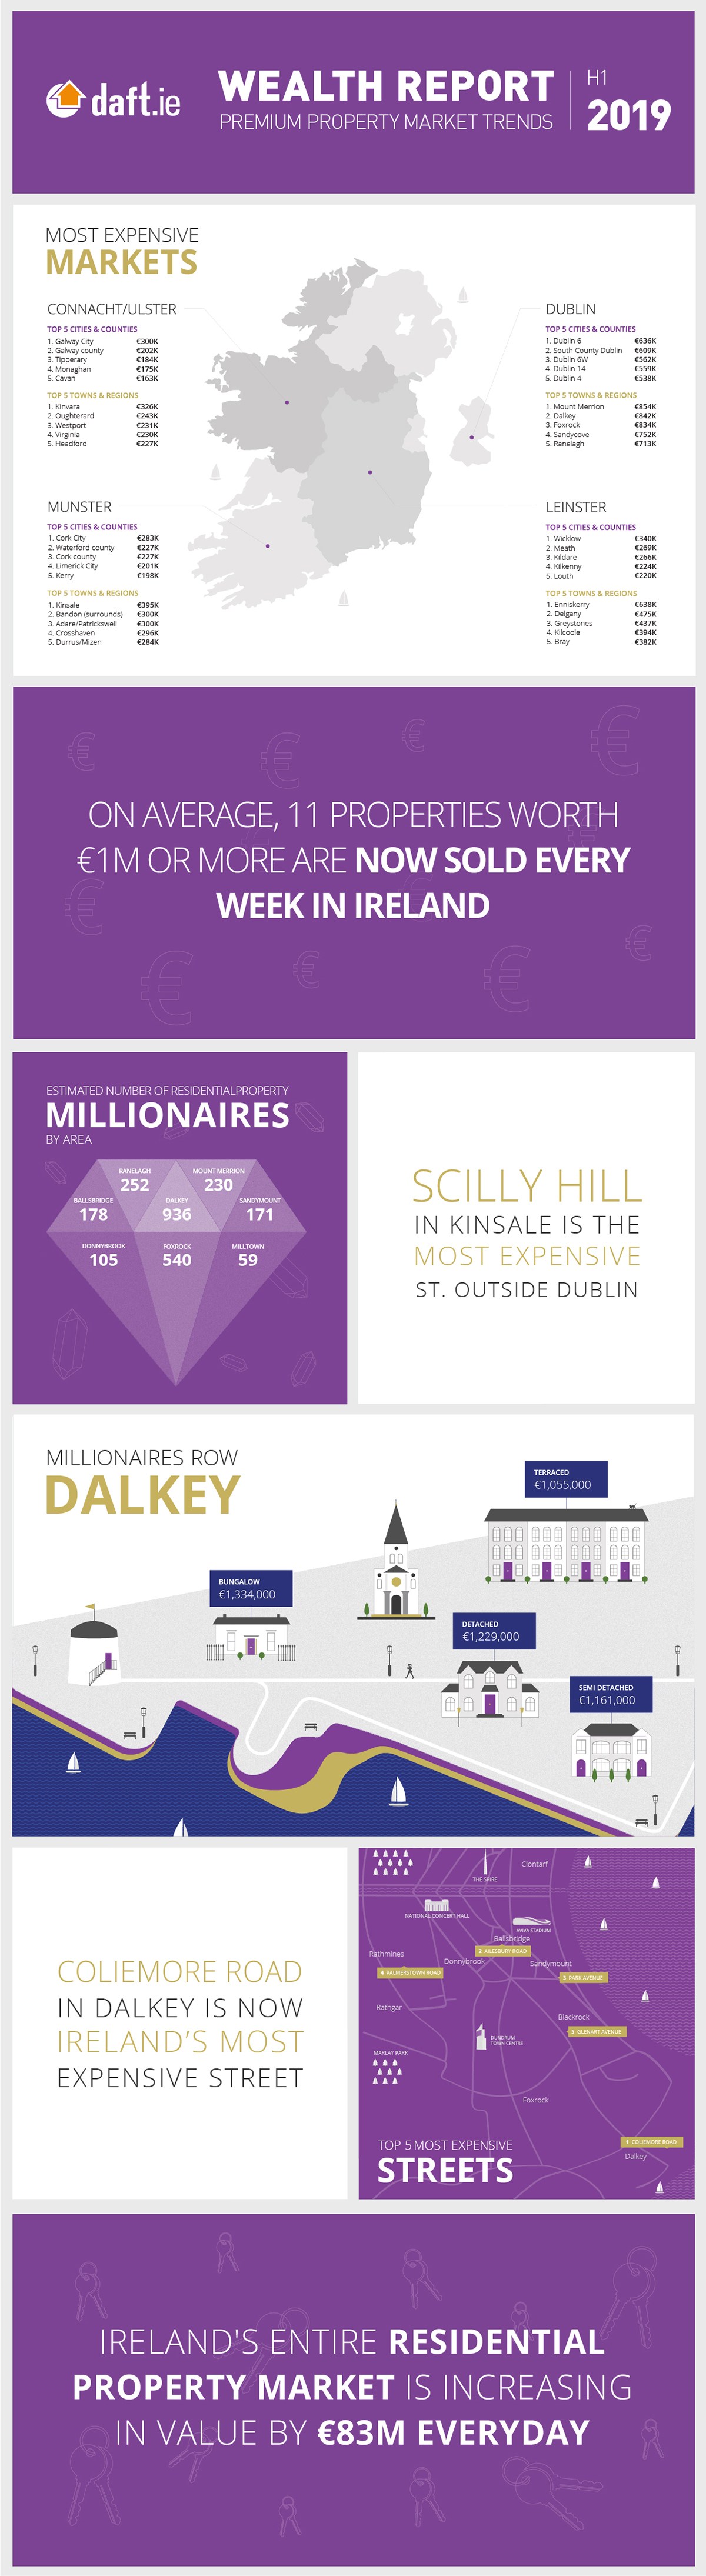 Daft.ie Wealth Report: H1 2019 Infographic